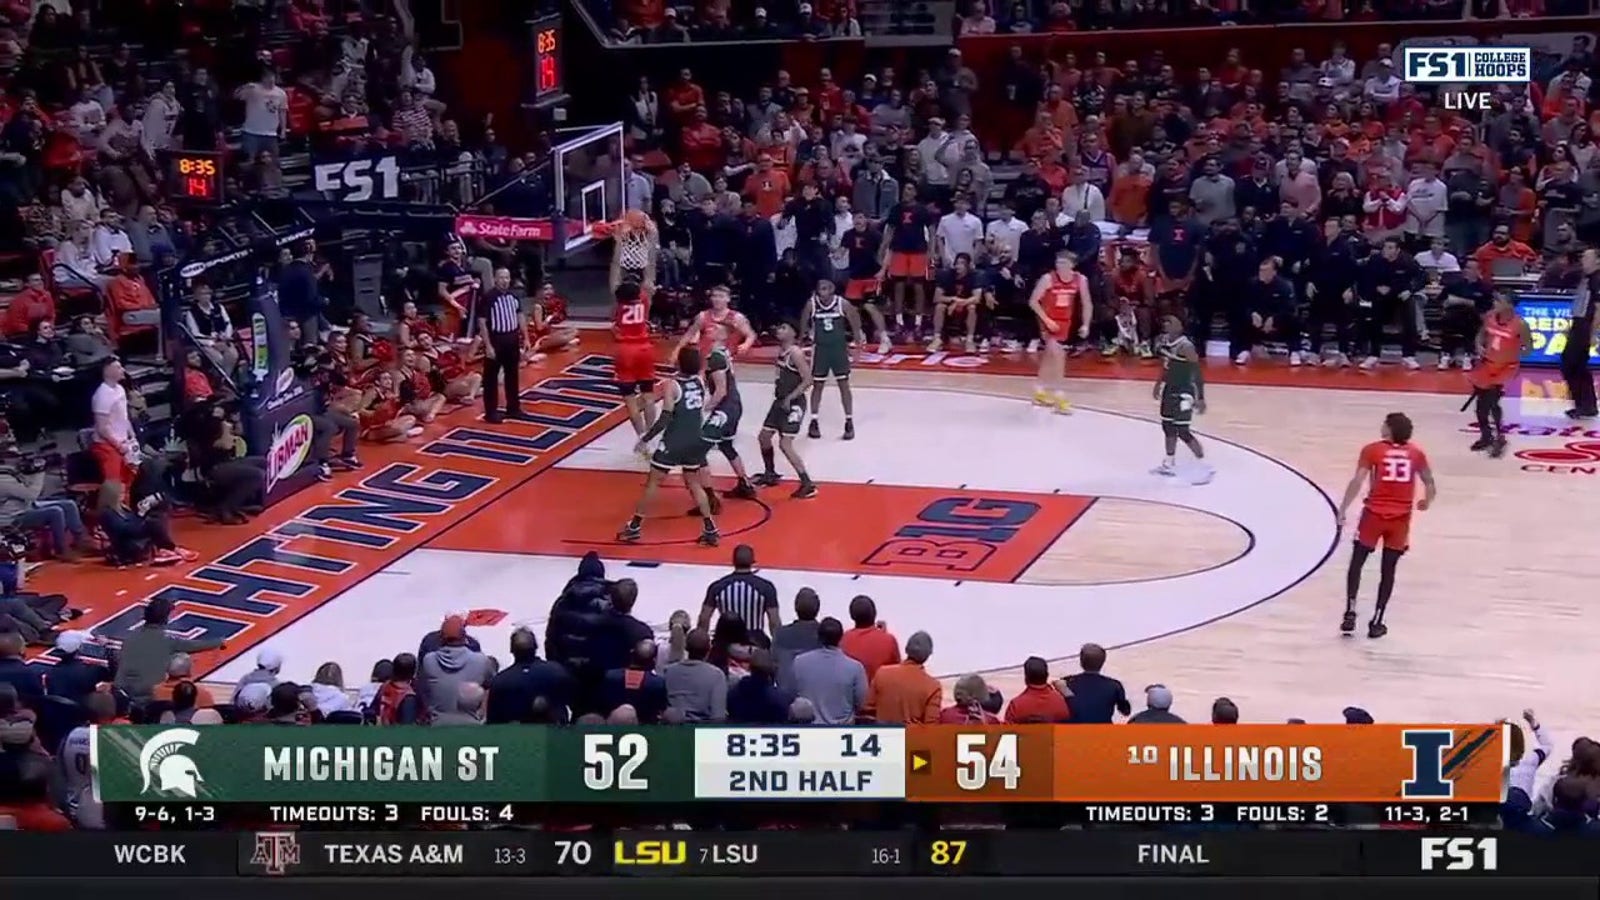 Marcus Domask drops a pass to Ty Rodgers for a strong two-handed slam to extend Illinois' lead over Michigan State 